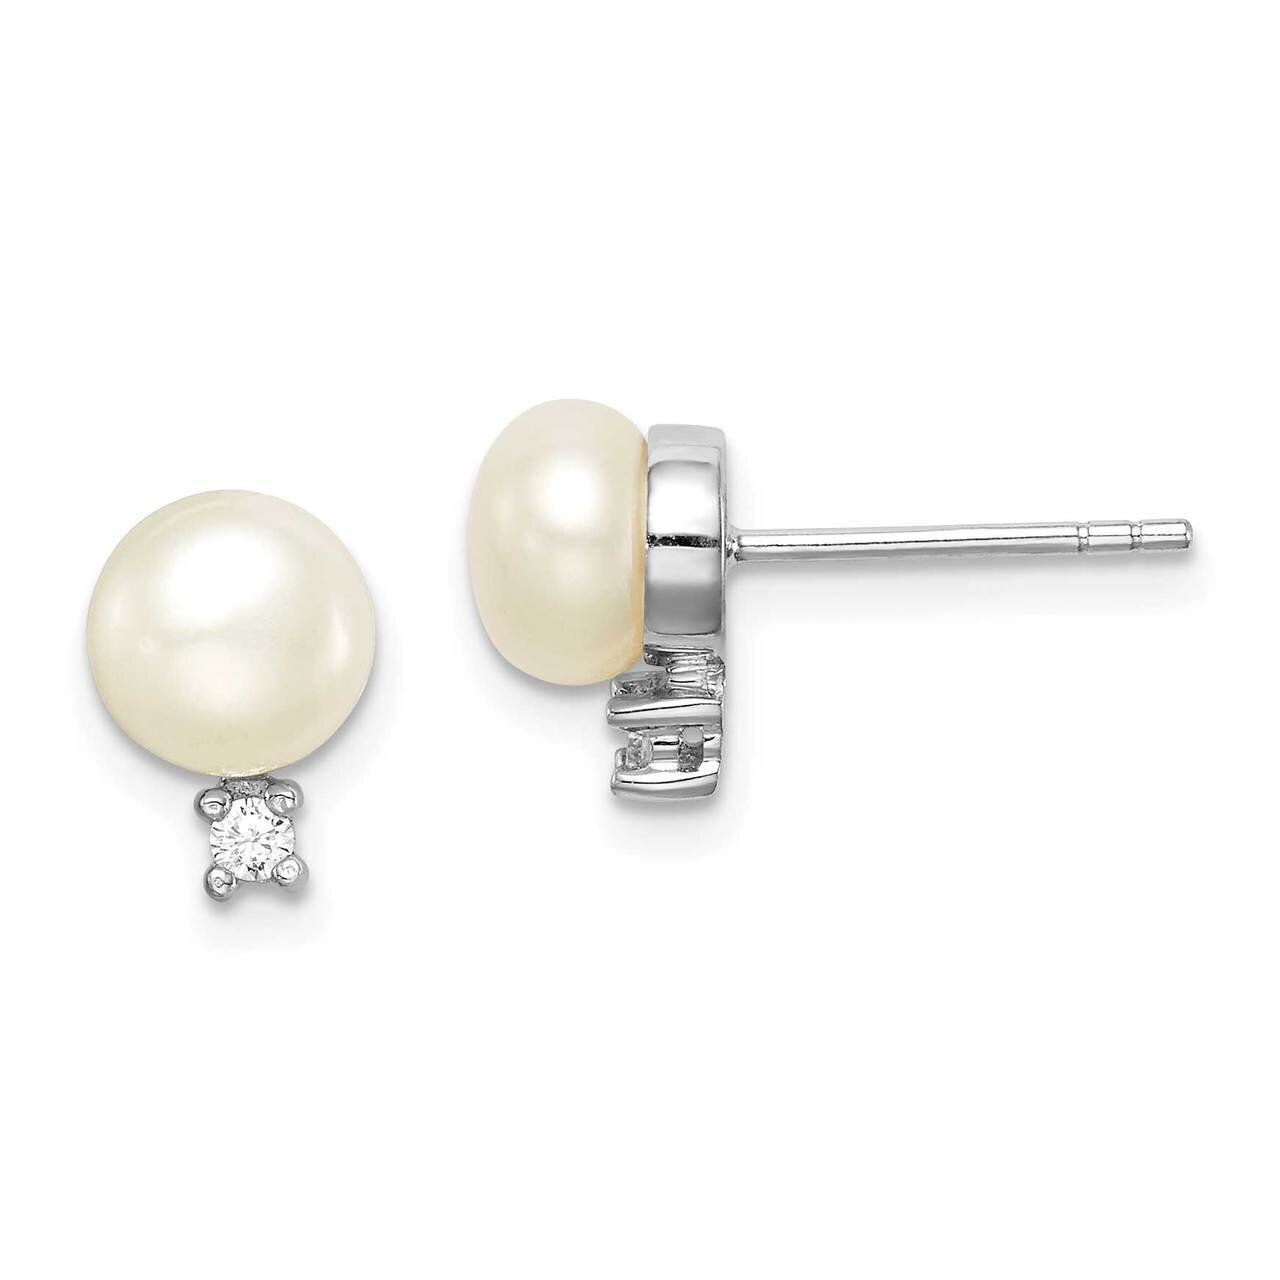 6-7mm White Button Freshwater Cultured Pearl CZ Diamond Earrings Sterling Silver Rhodium Plated QE15258